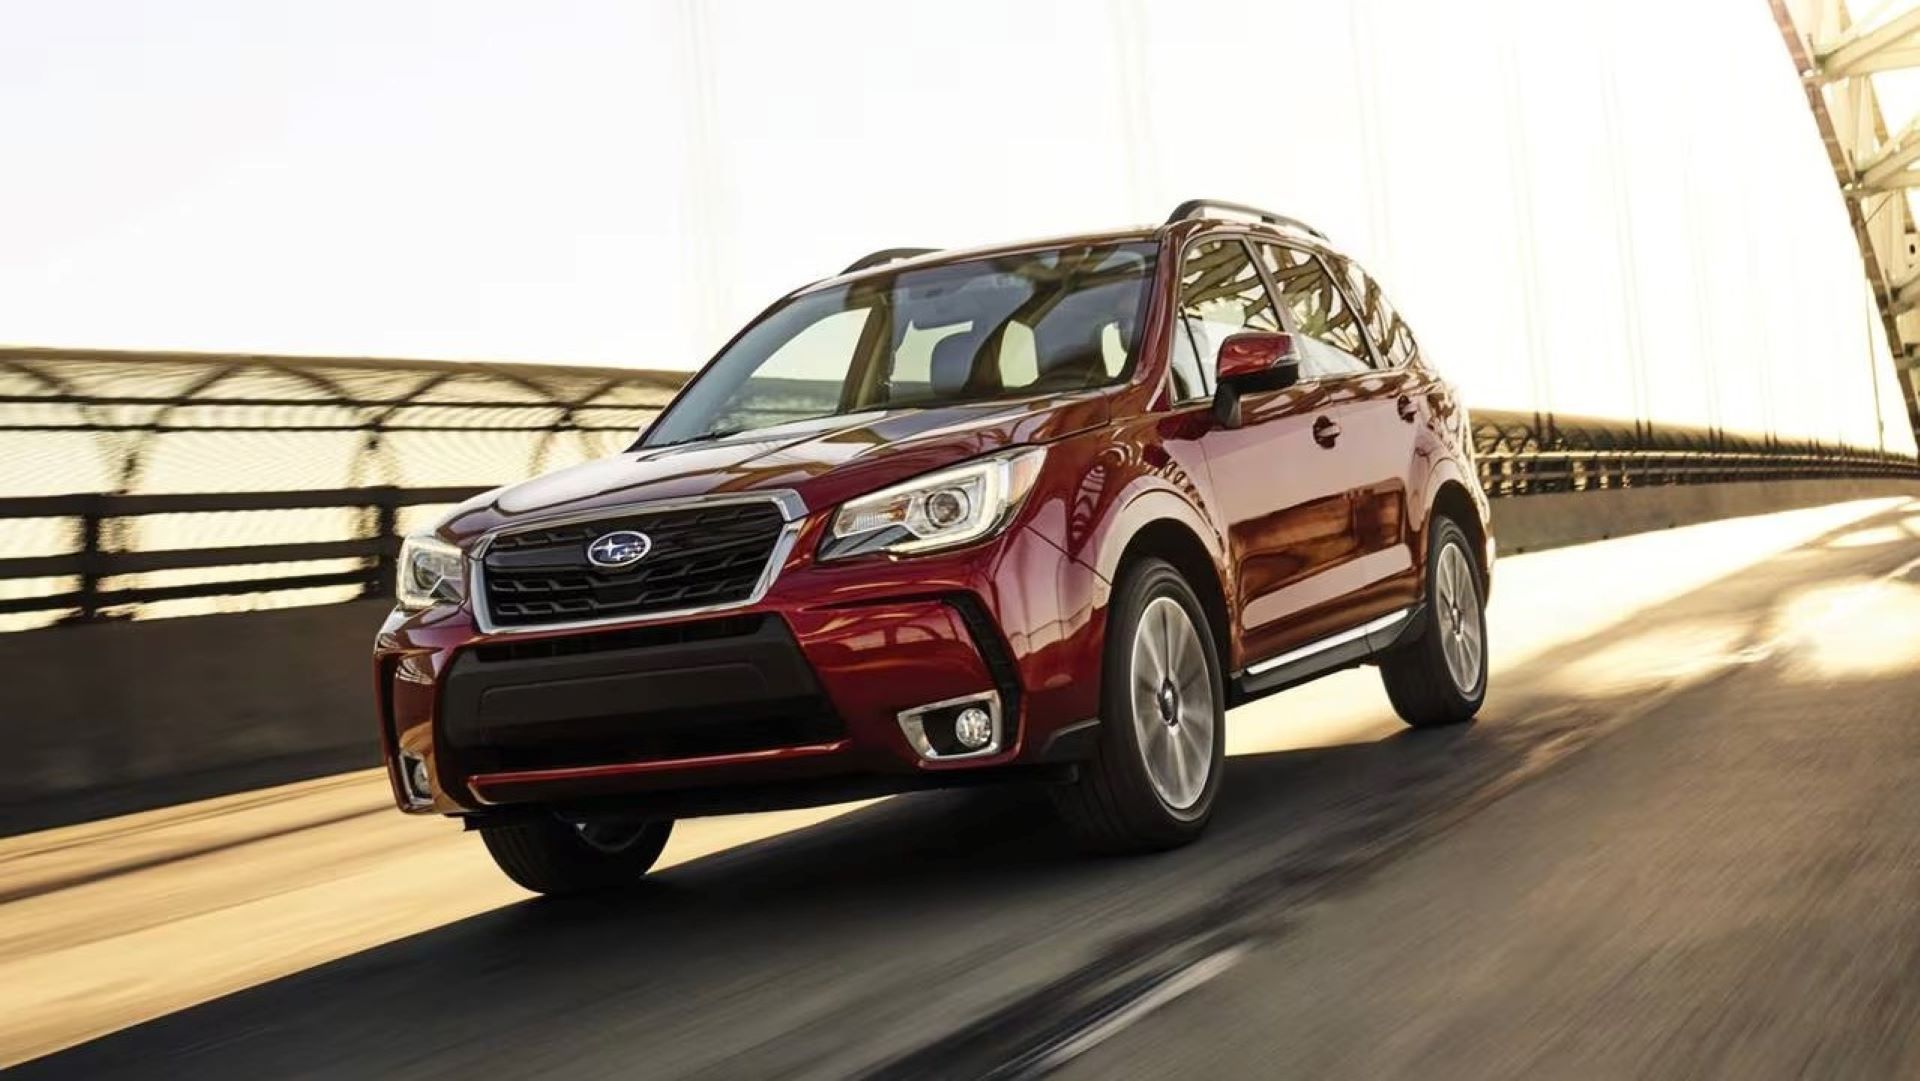 Front 3/4 shot of a red 2018 Subaru Forester 2.0 XT Touring cruising